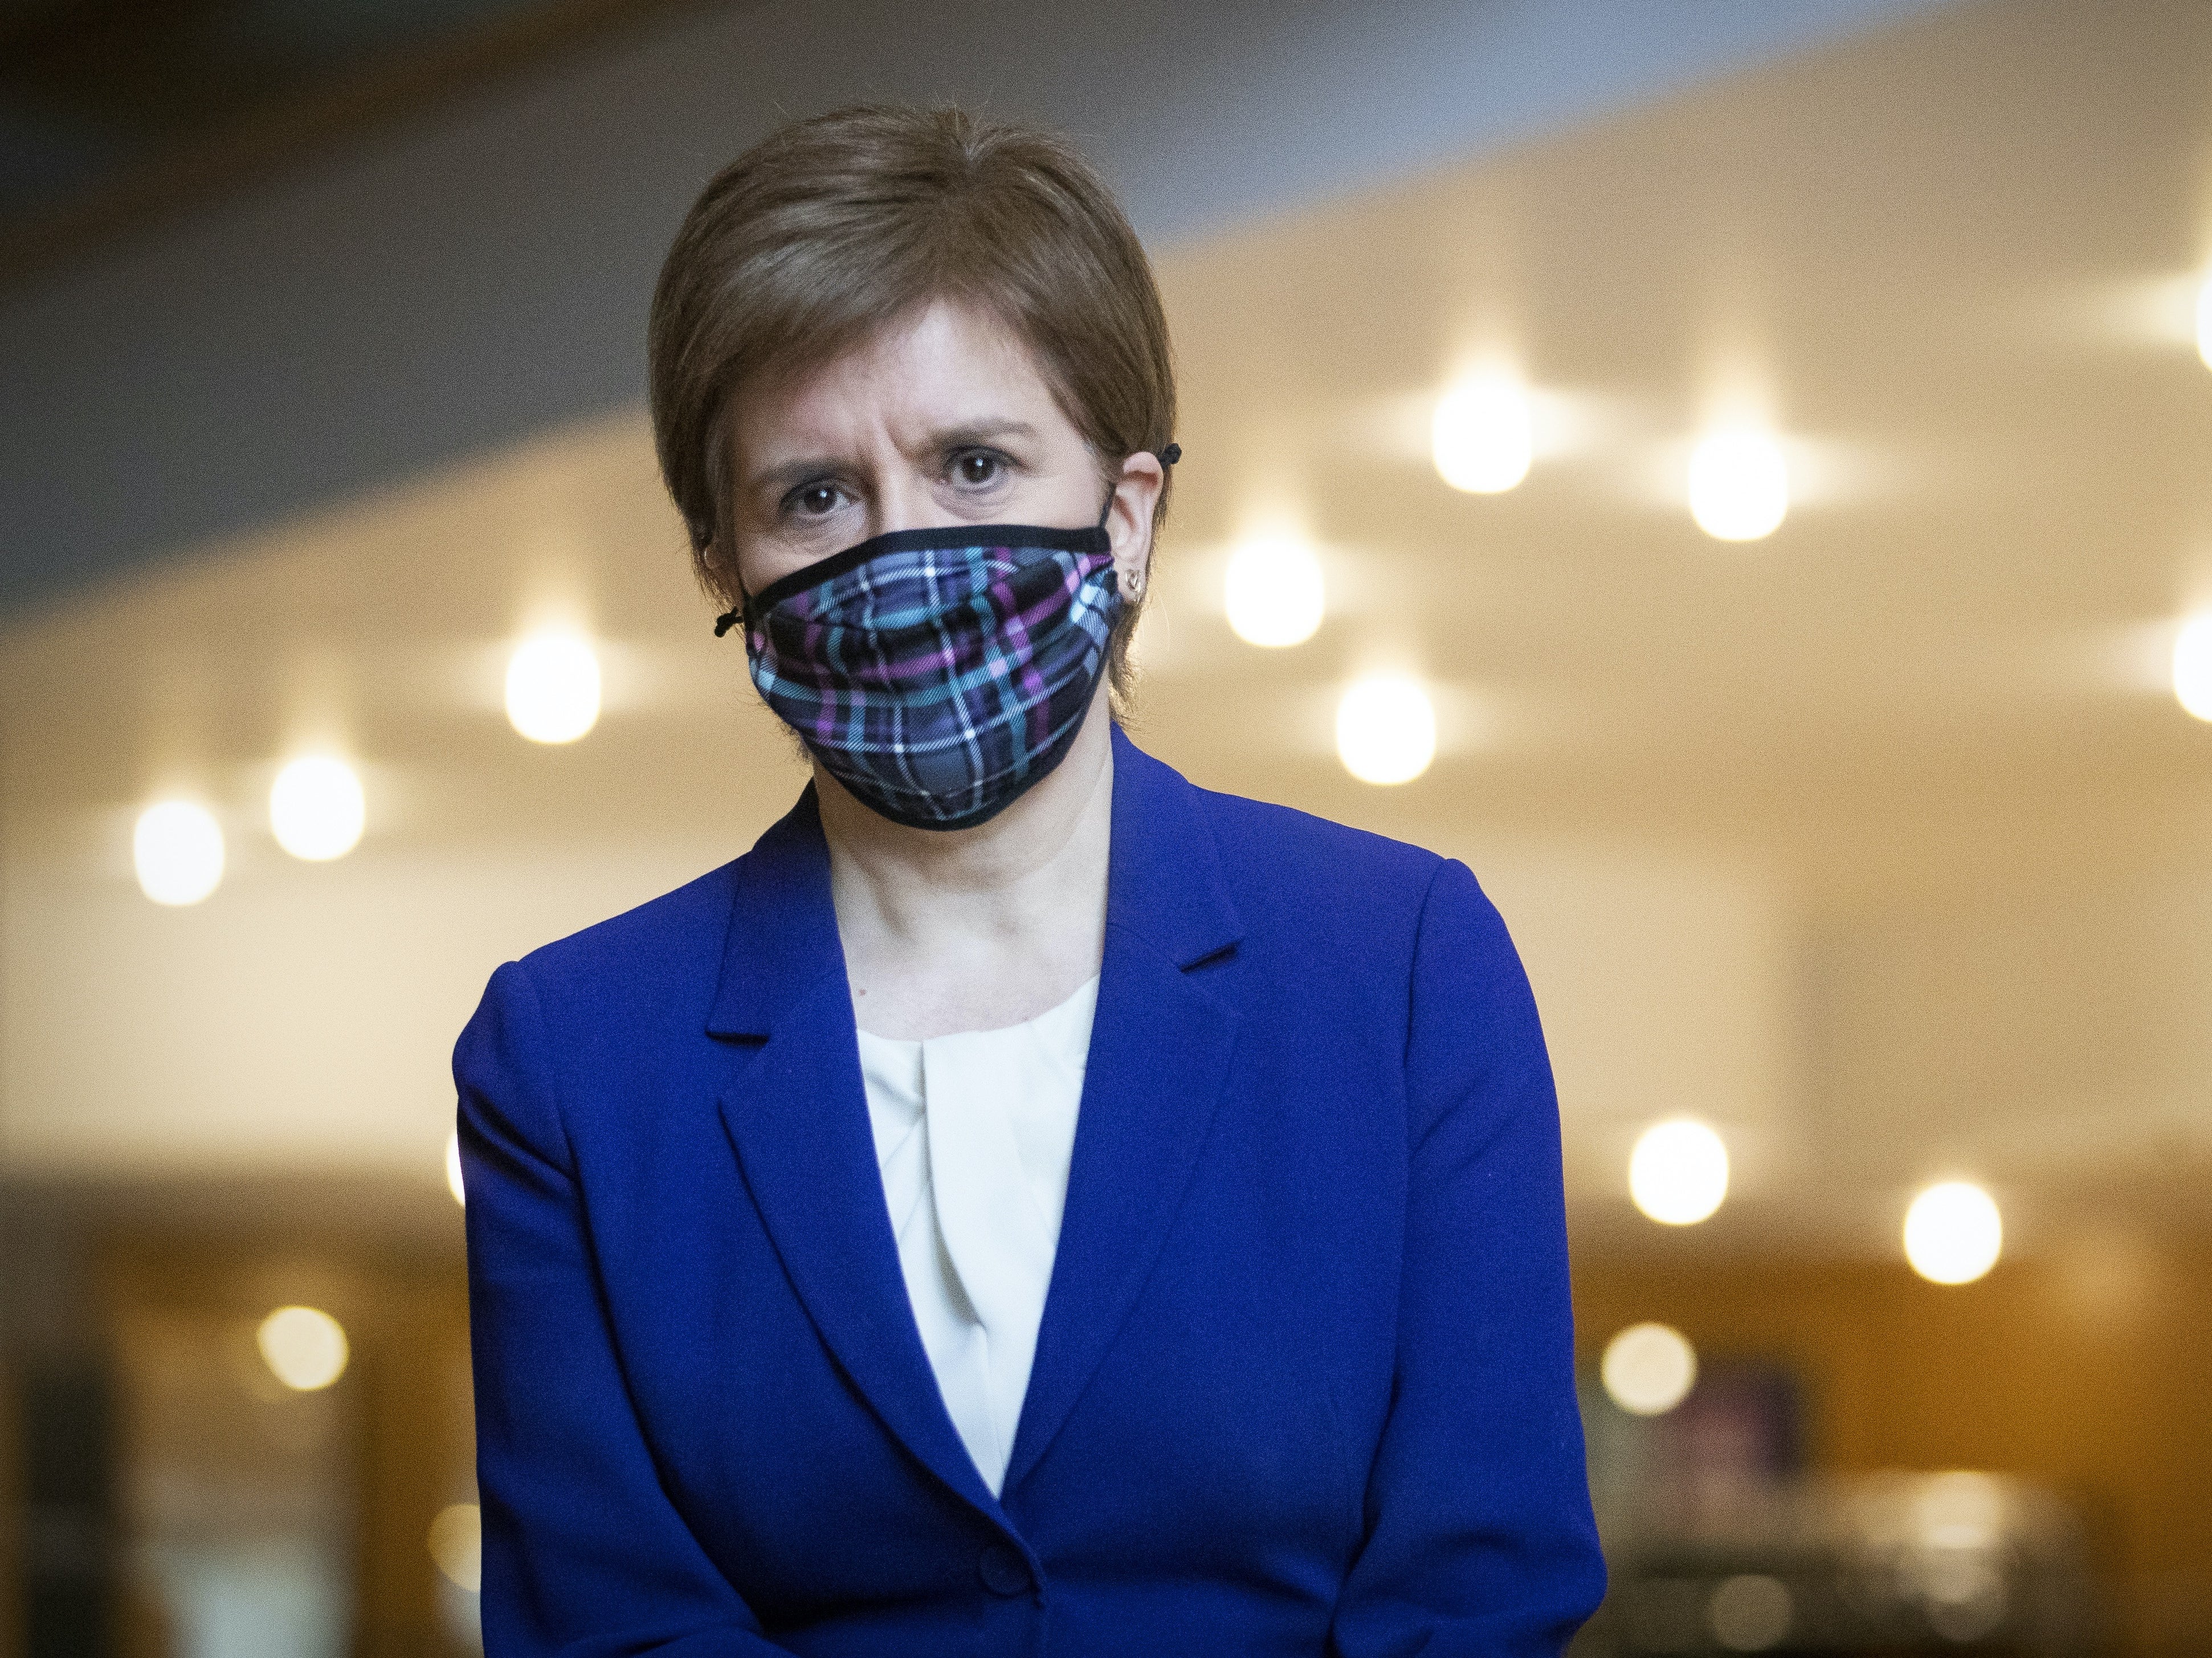 SNP leader and first minister Nicola Sturgeon